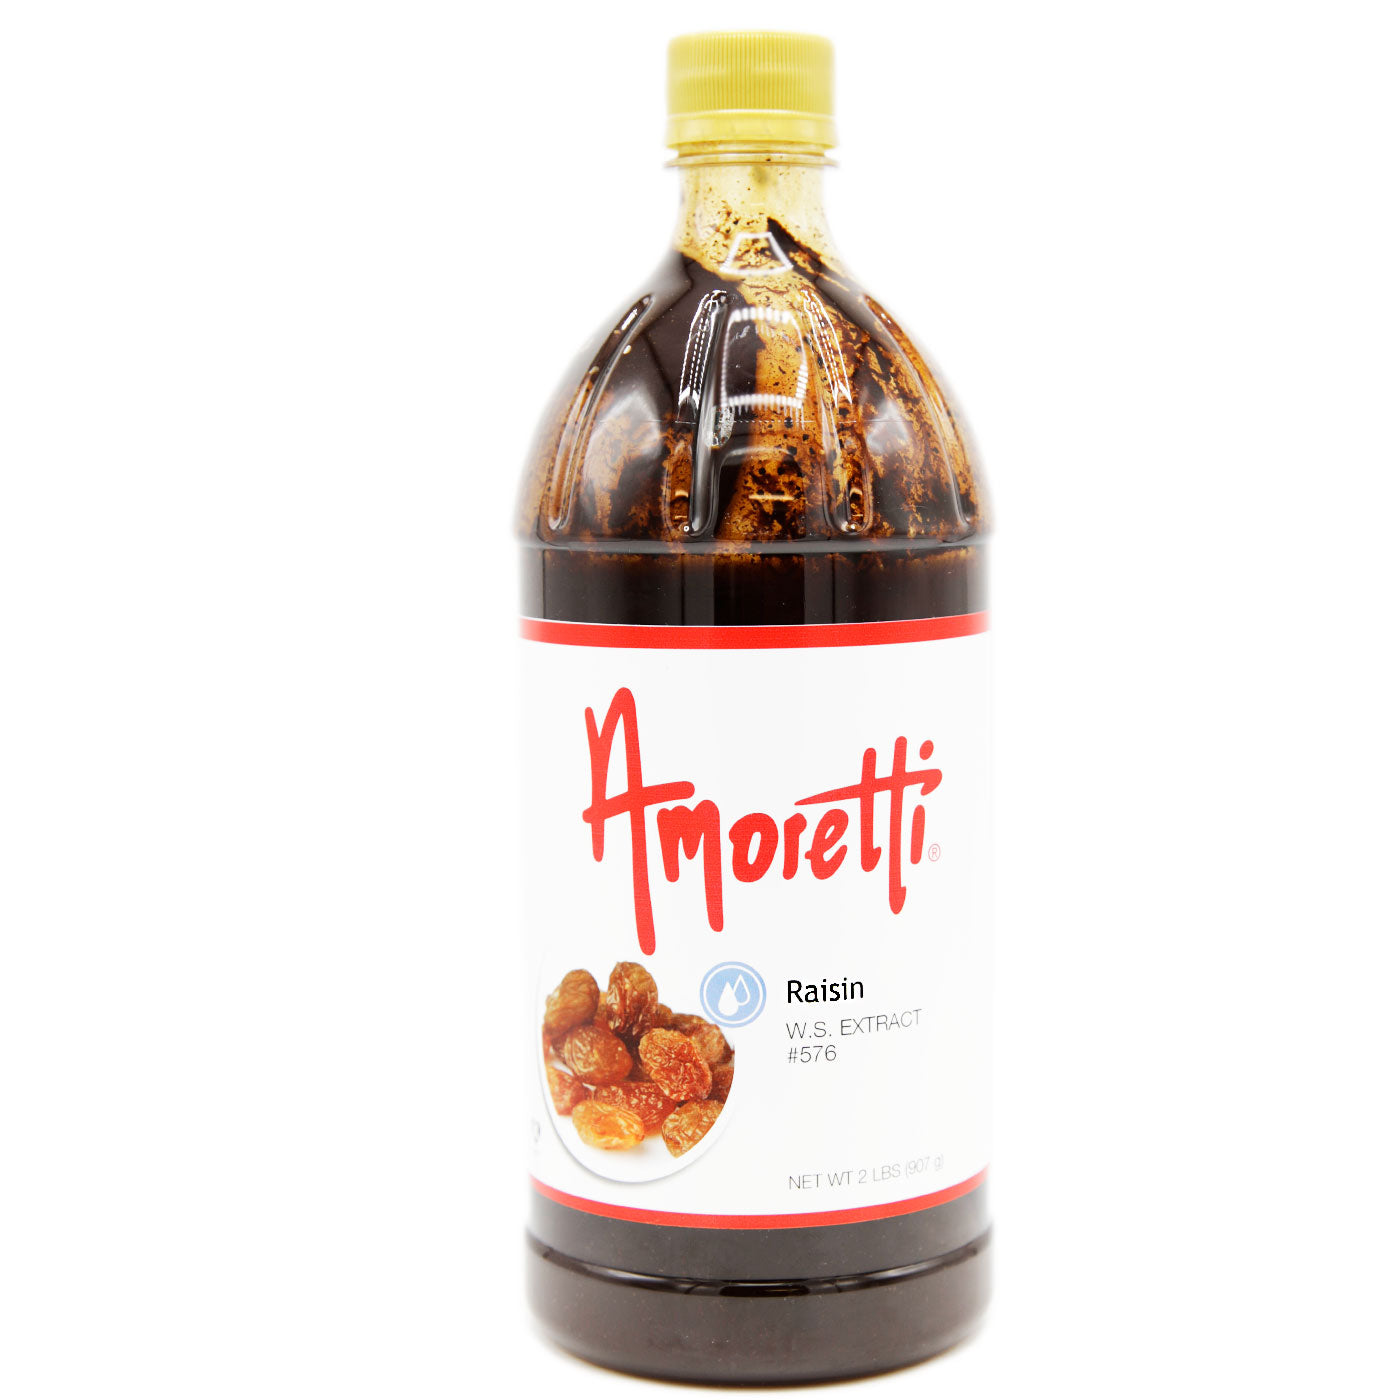 Cinnamon Extract Water Soluble — Amoretti